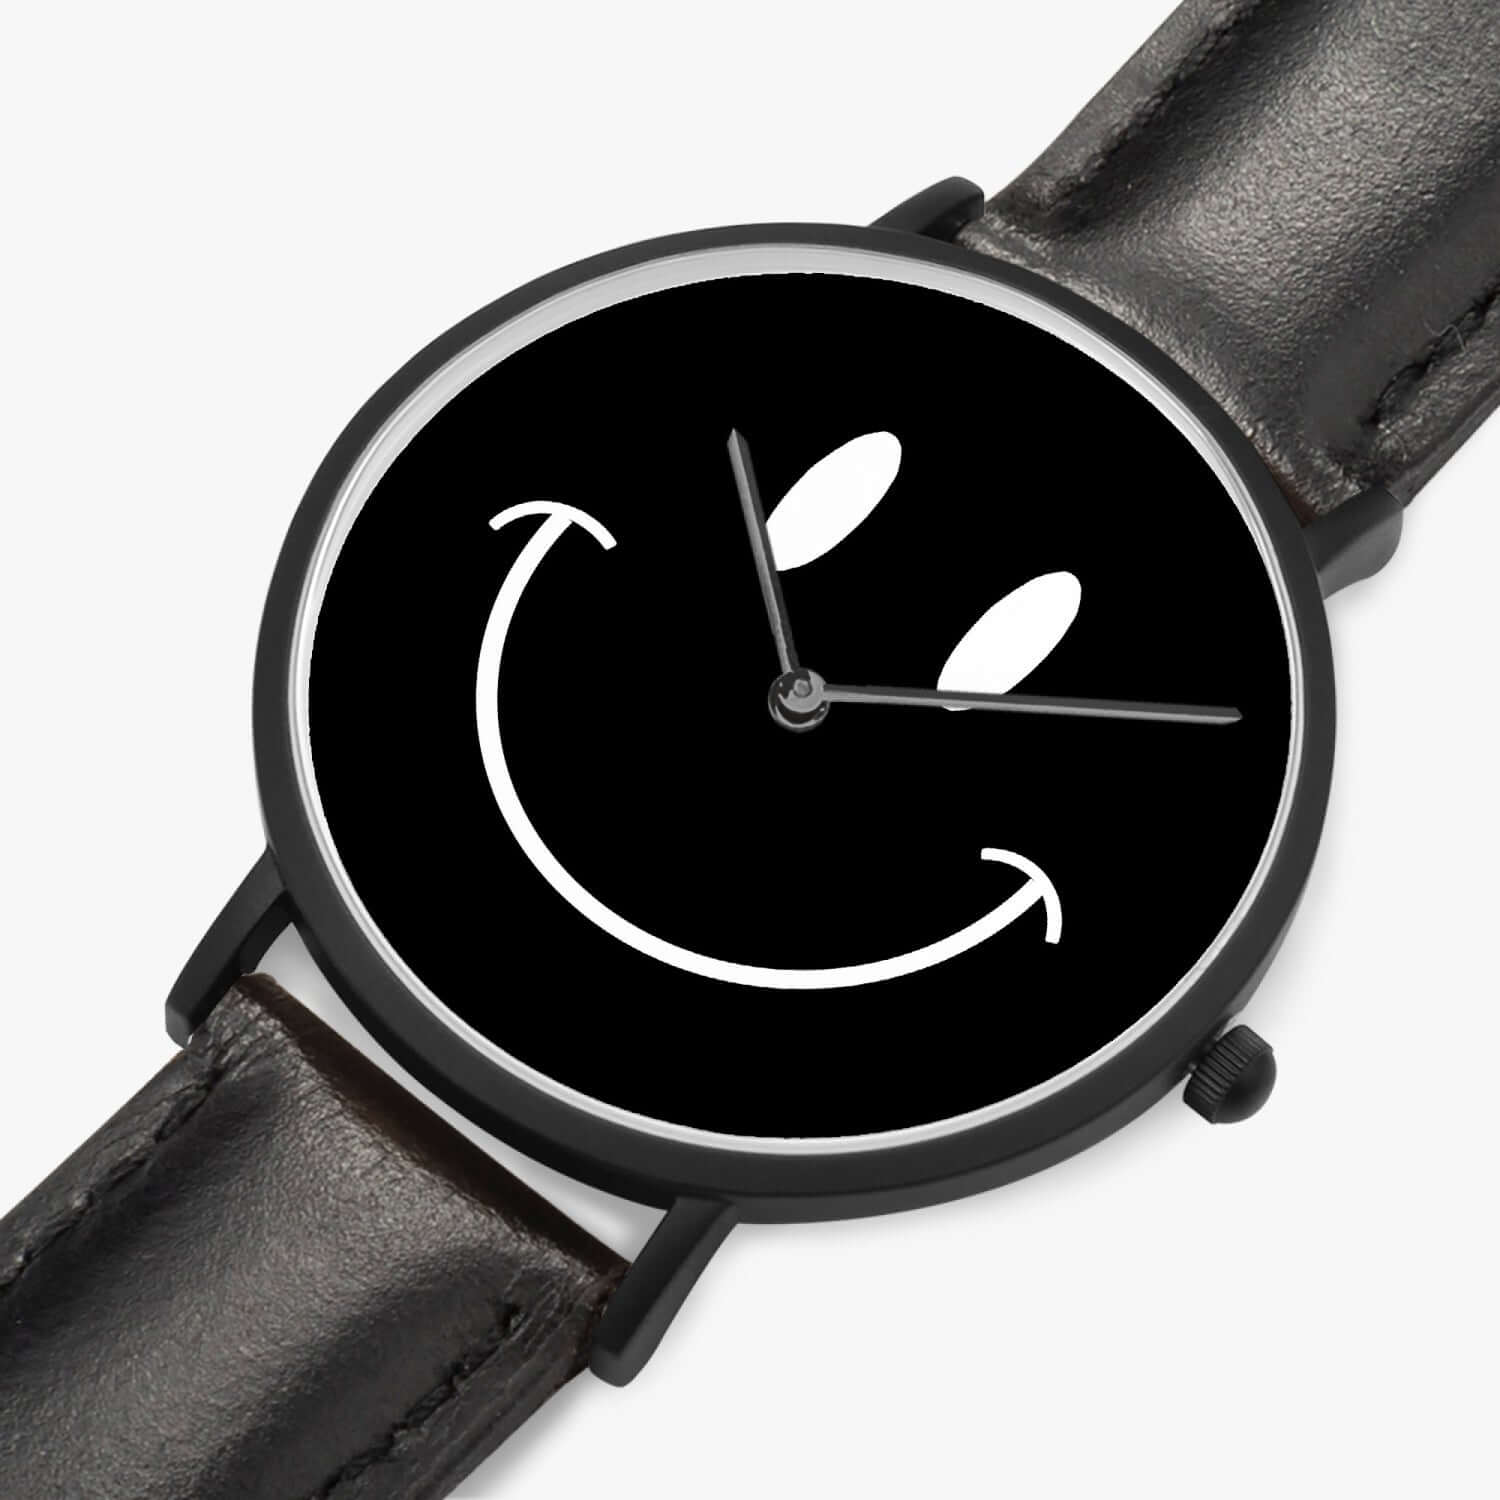 Be Happy Black Smiley Face Ultra-Thin Leather Strap Quartz Watch - The Kindness Cause Dad Gifts